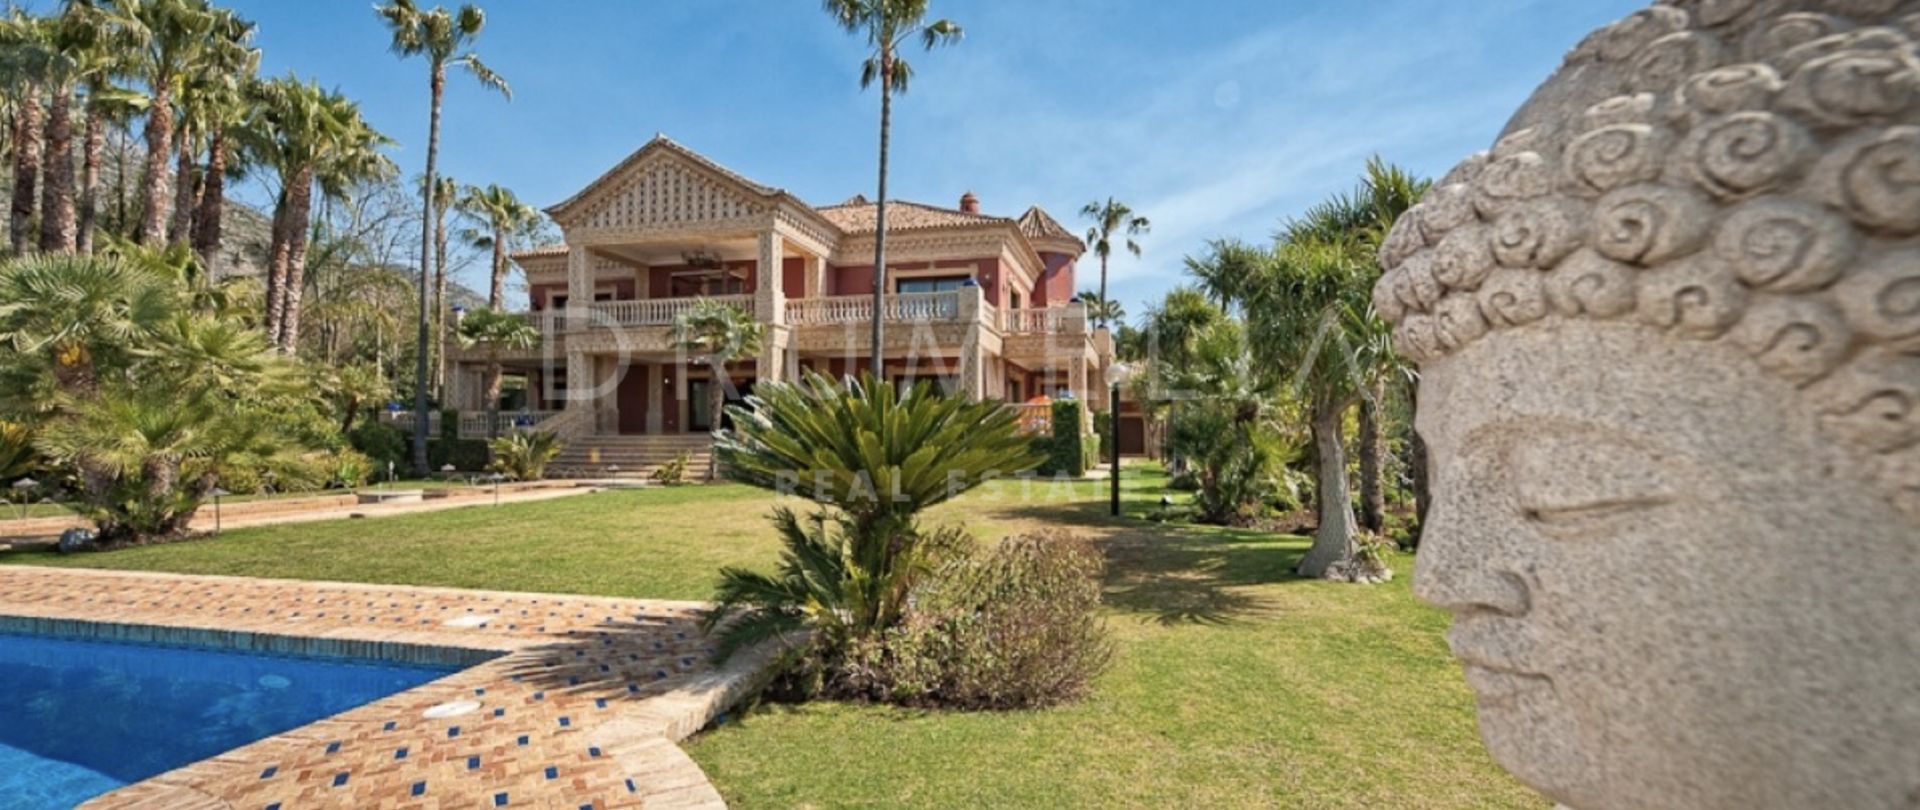 Extraordinary Grand Mansion with Views in Sierra Blanca for sale on Marbella's Golden Mile